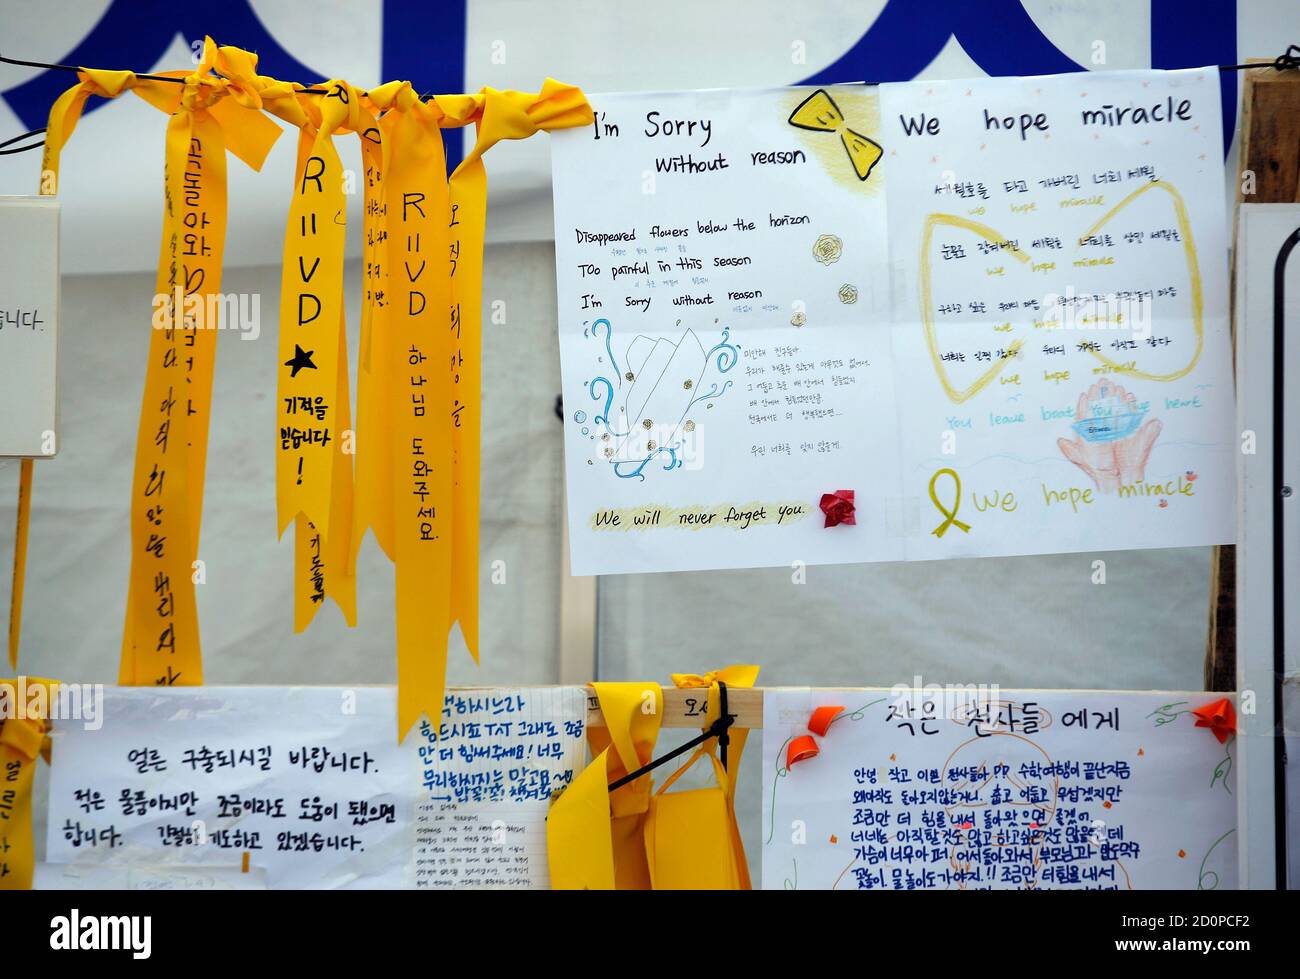 Yellow ribbons and messages dedicated to the missing and dead passengers onboard the capsized Sewol ferry, are hung at a port where many family members wait for news from the search and rescue team in Jindo April 24, 2014. The Sewol sank on April 16 on a routine trip from the port of Incheon, near Seoul, to the southern holiday island of Jeju. Investigations are focused on human error or a mechanical fault, with media saying the ship was three times overloaded, with cargo poorly stowed and inadequate ballast water.  REUTERS/Kim Kyung-Hoon (SOUTH KOREA - Tags: DISASTER MARITIME) Stock Photo